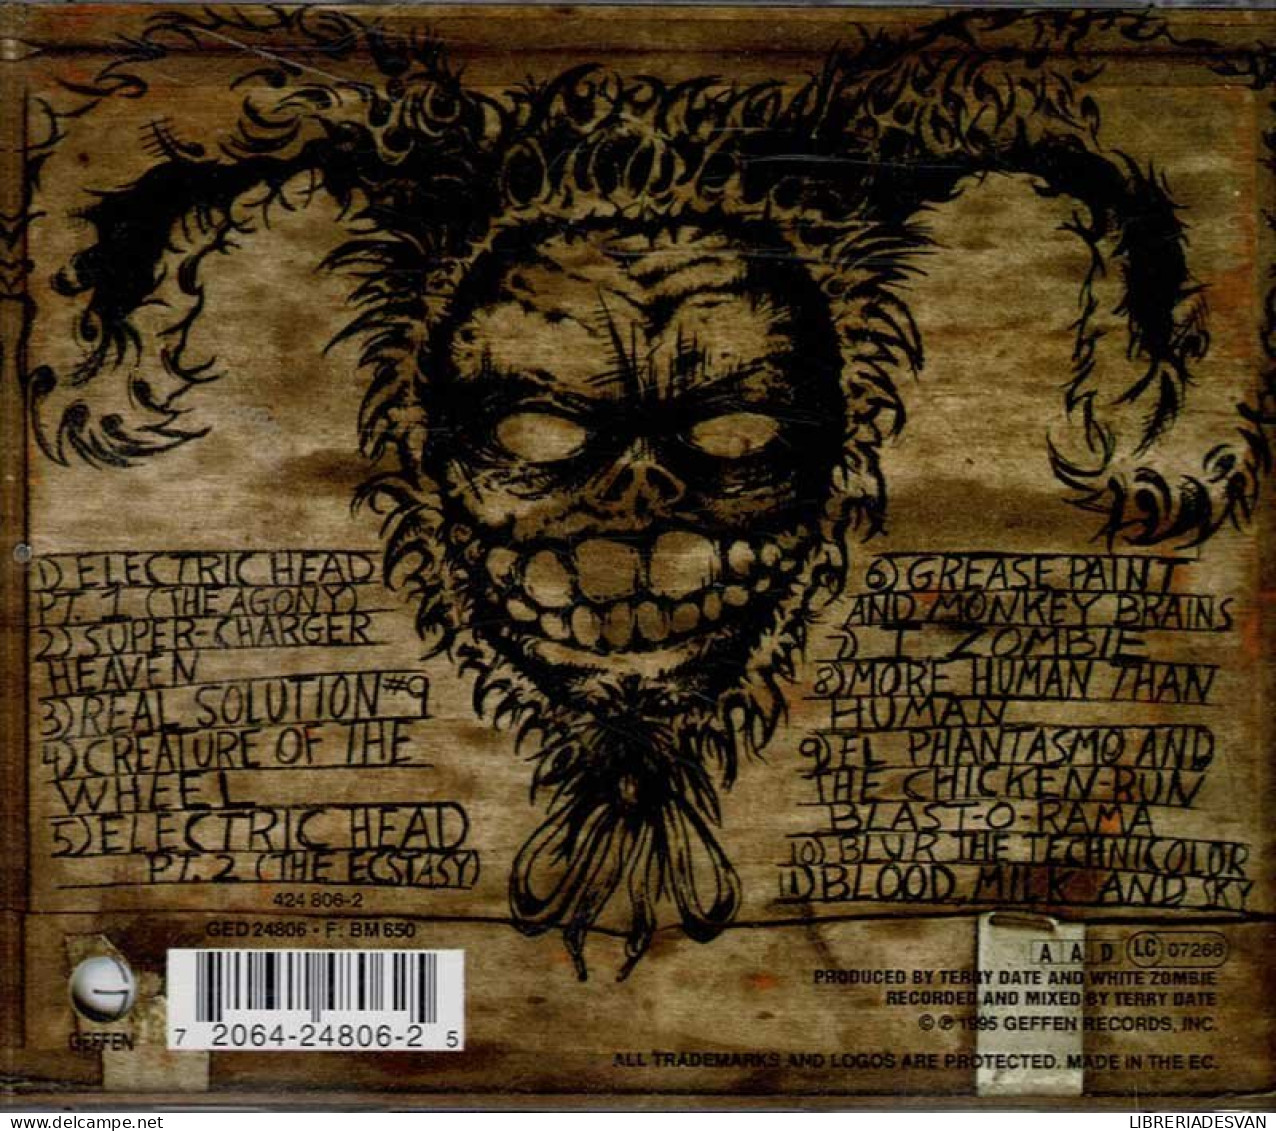 White Zombie - Astro-Creep: 2000 (Songs Of Love, Destruction And Other Synthetic Delusions Of The Electric Head). CD - Rock